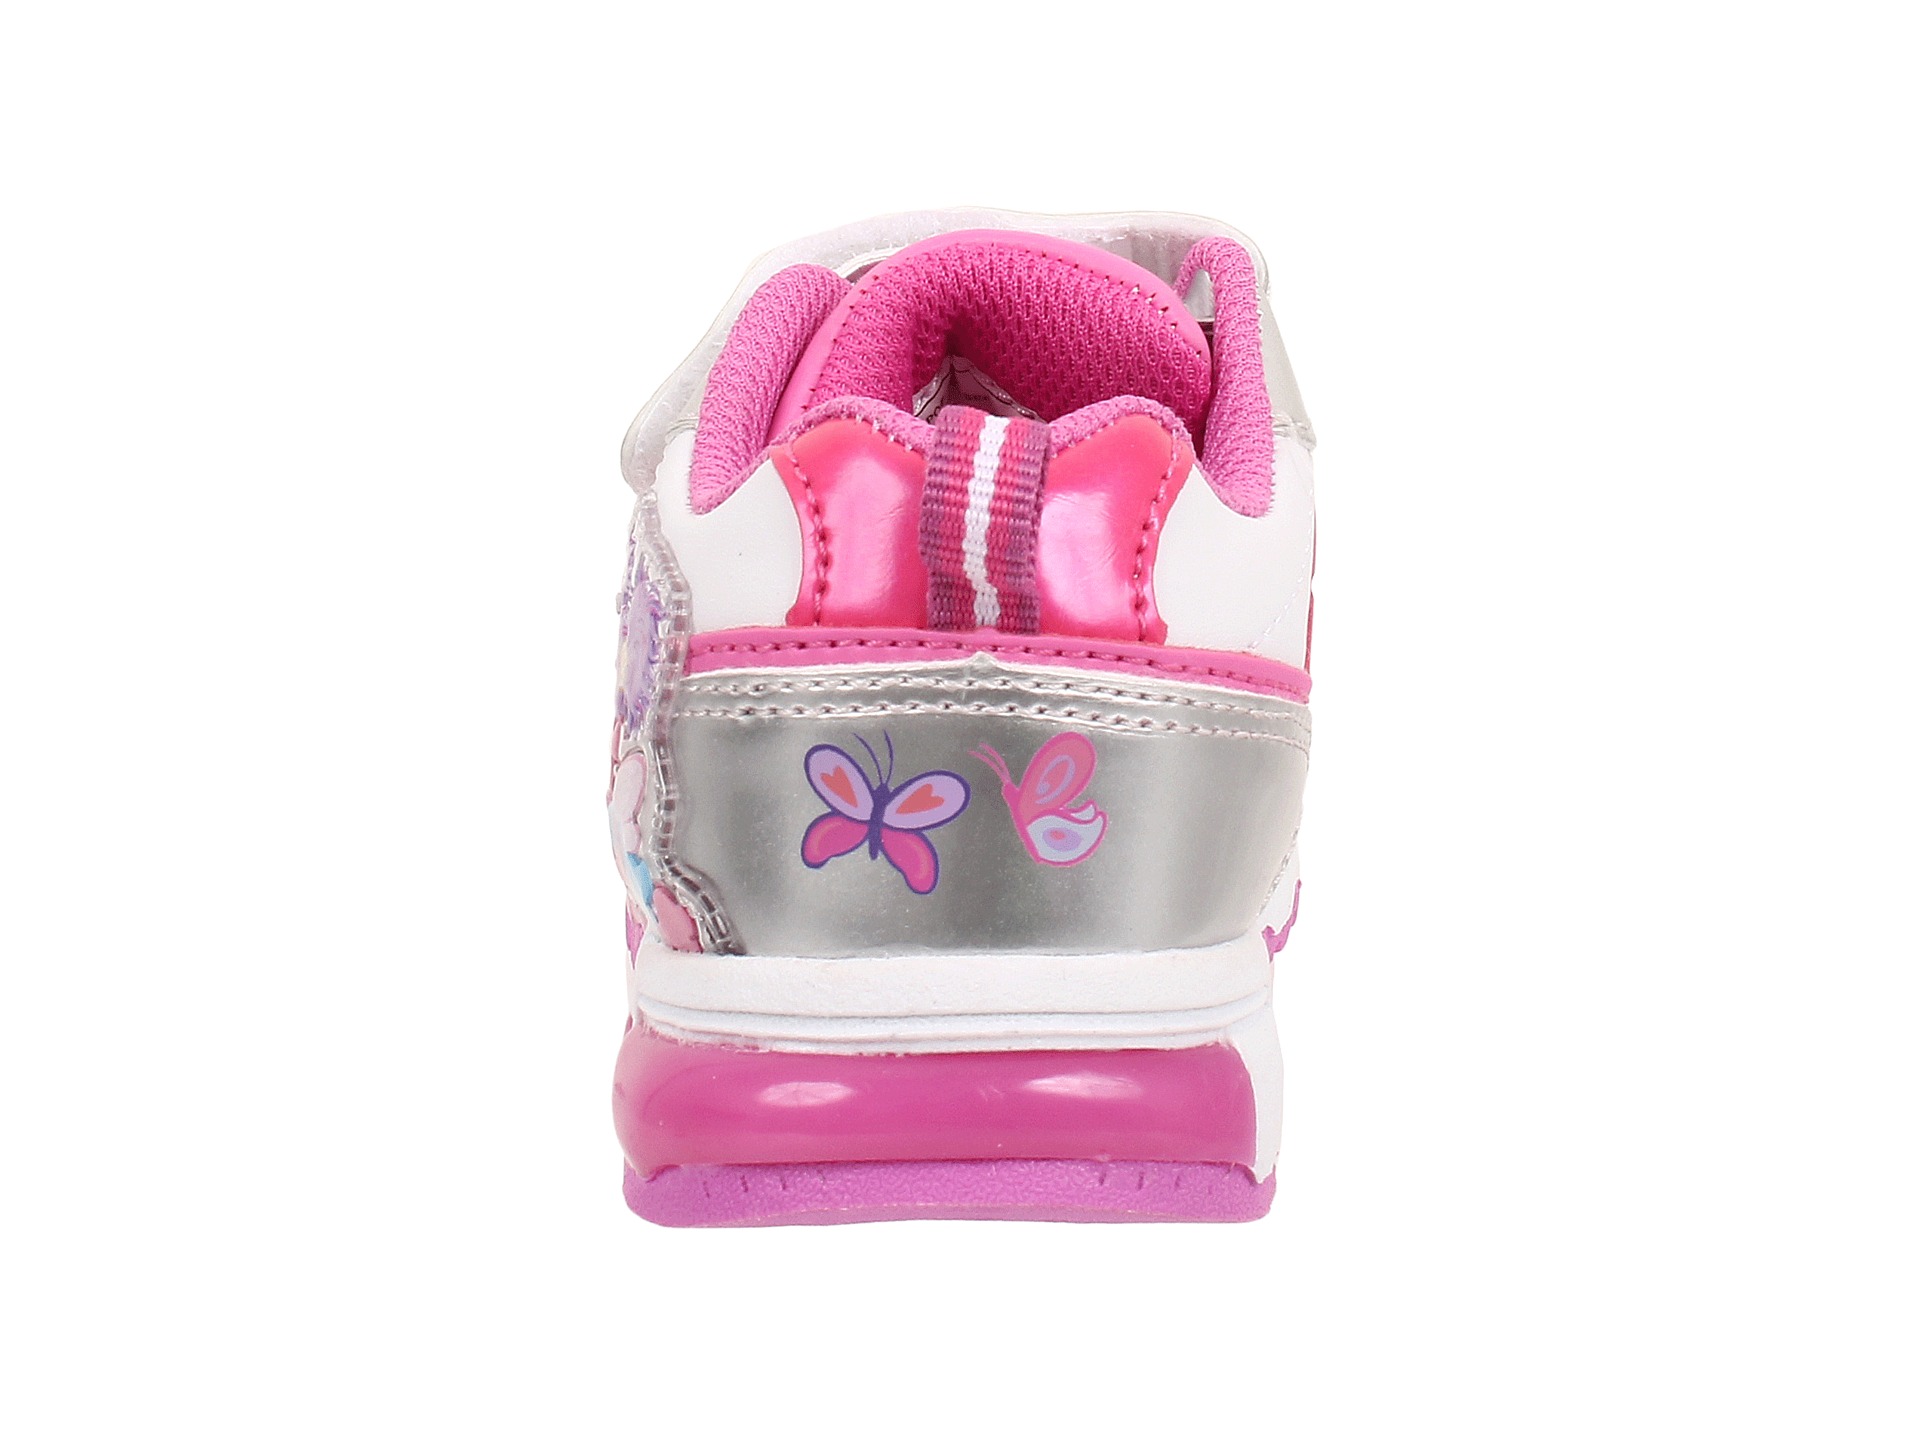 Favorite Characters Sesame Street Abby 1sef326 Lighted Shoe Toddler White Pink